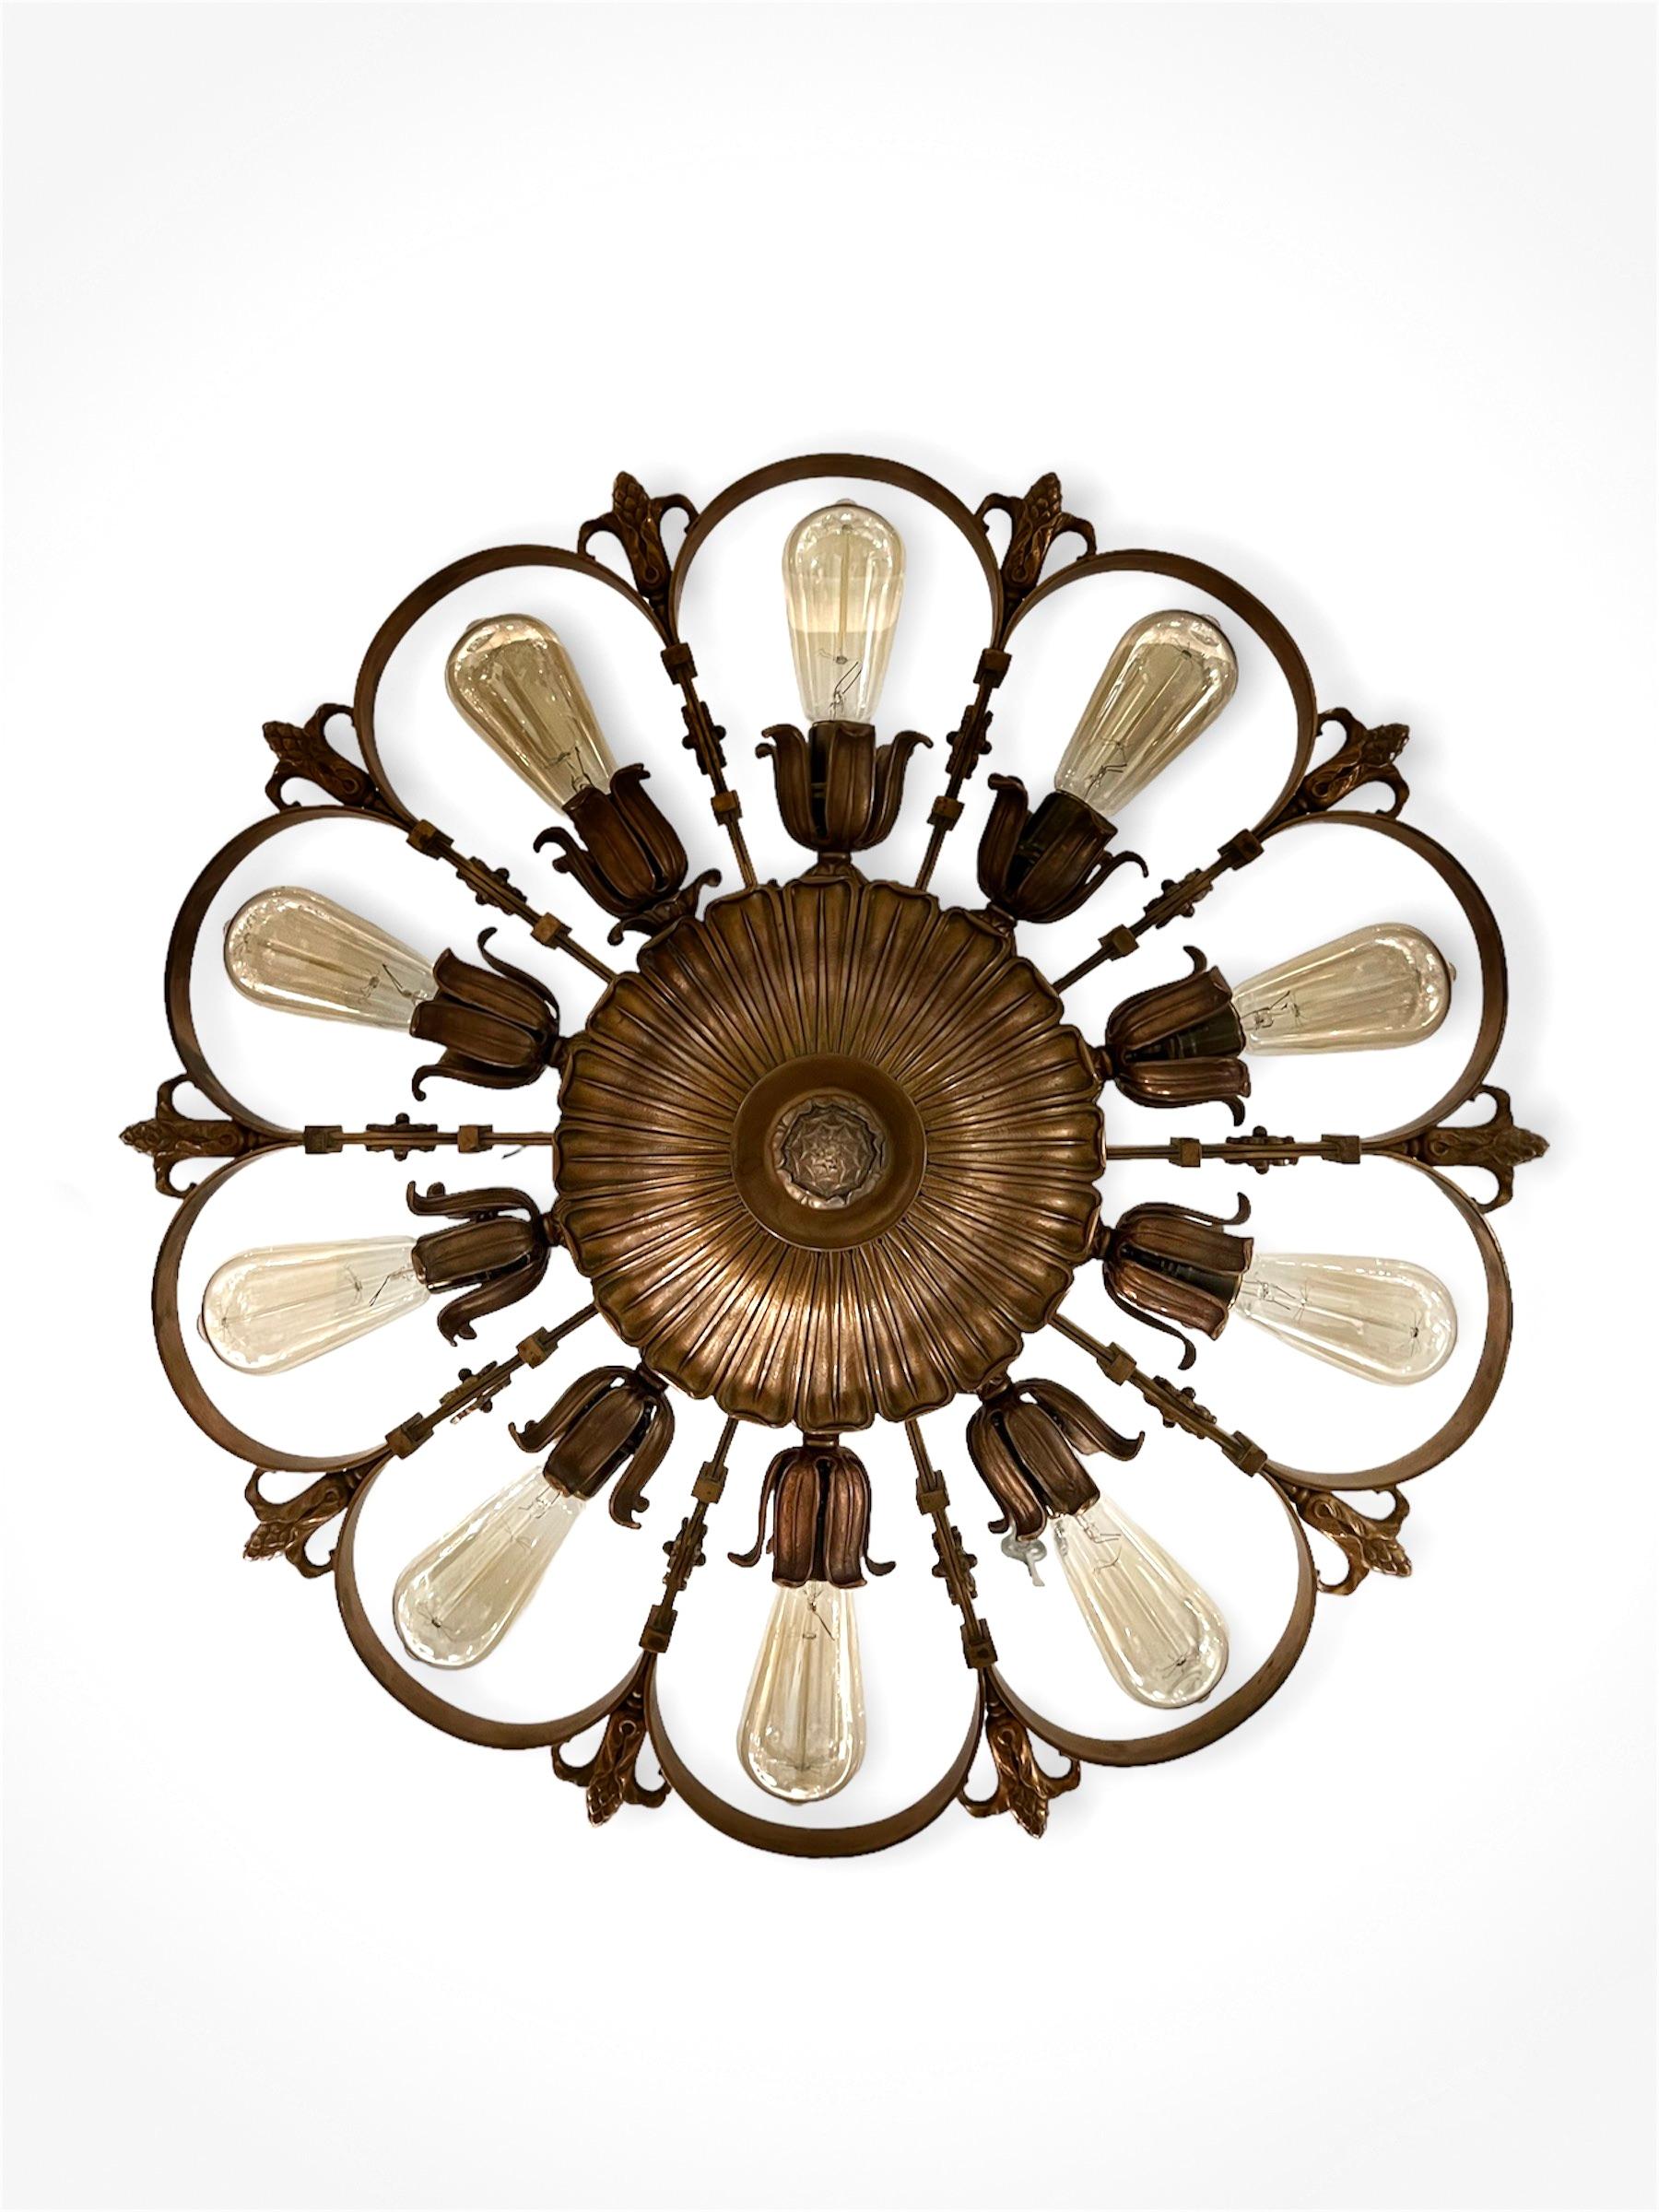 Rare Edward F. Caldwell 10 Light Chandelier with thick patinated bronze frame, USA, circa 1920s.